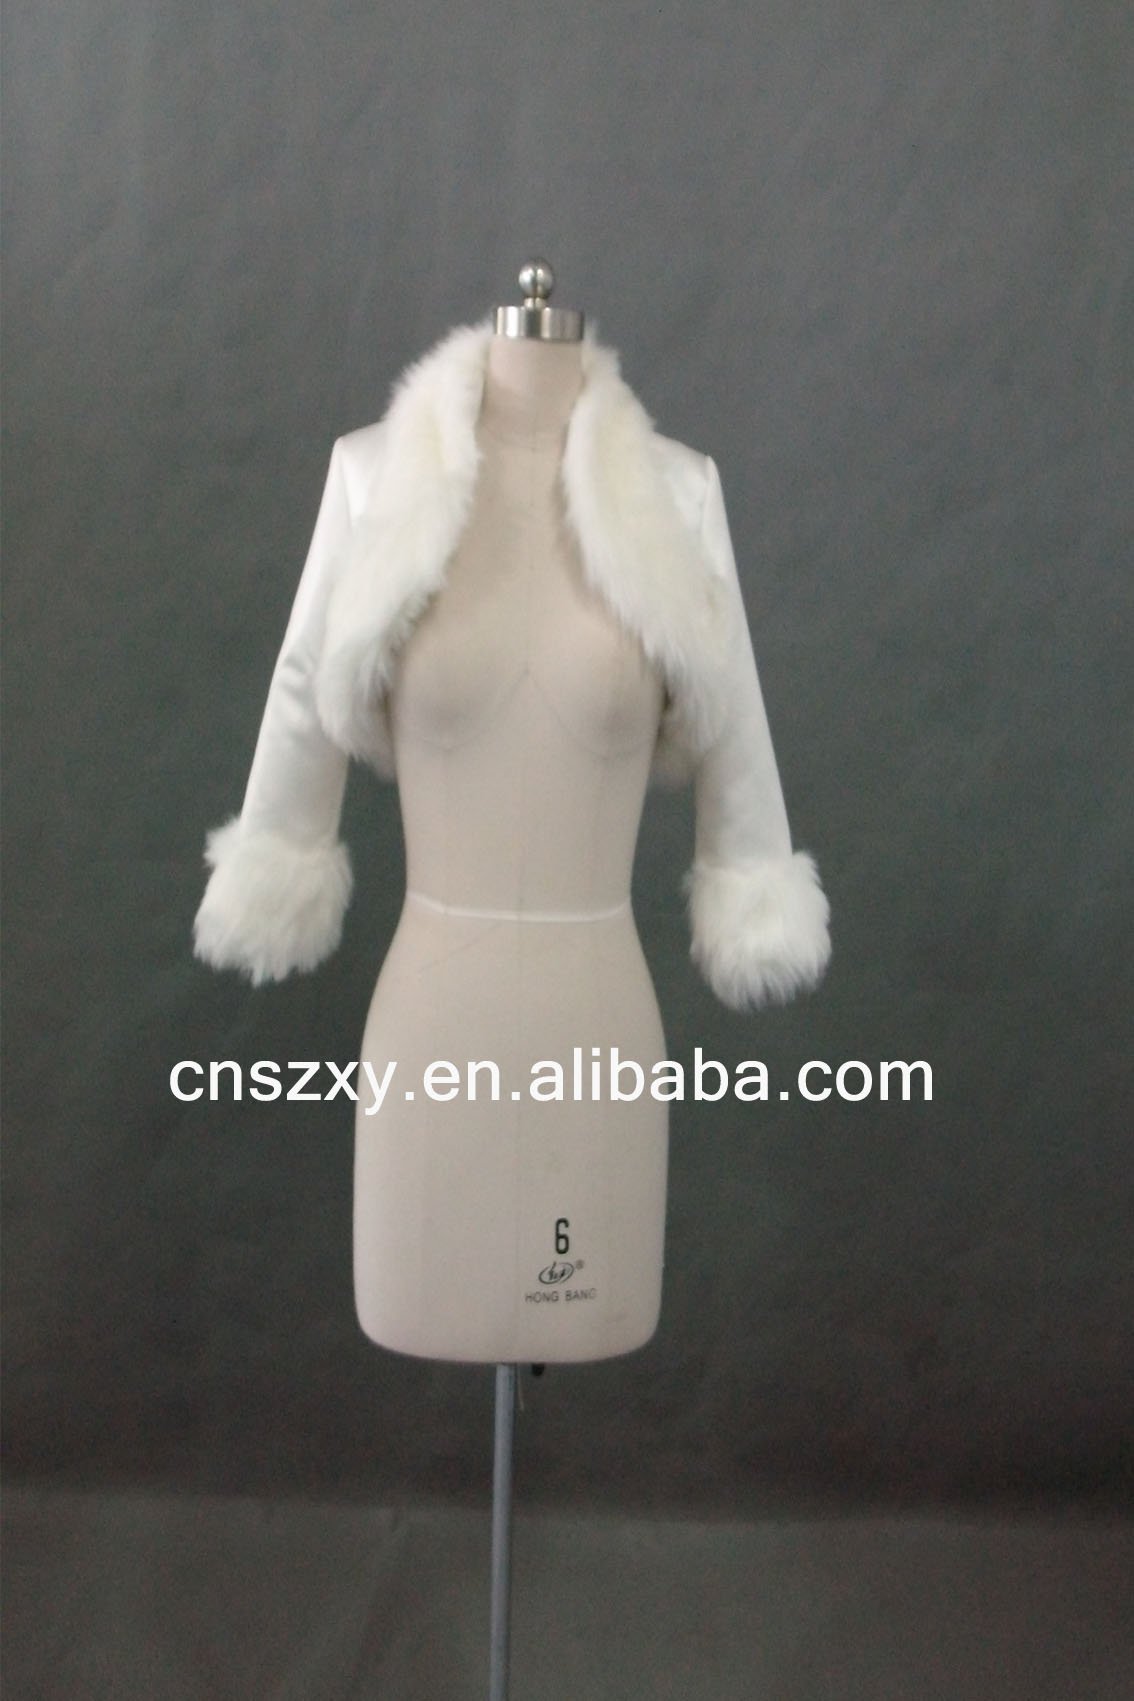 Hottest Ladies' Winter&Bridal Wedding Jacket(JK-05) Custom made **Formal&Informal occasions is available